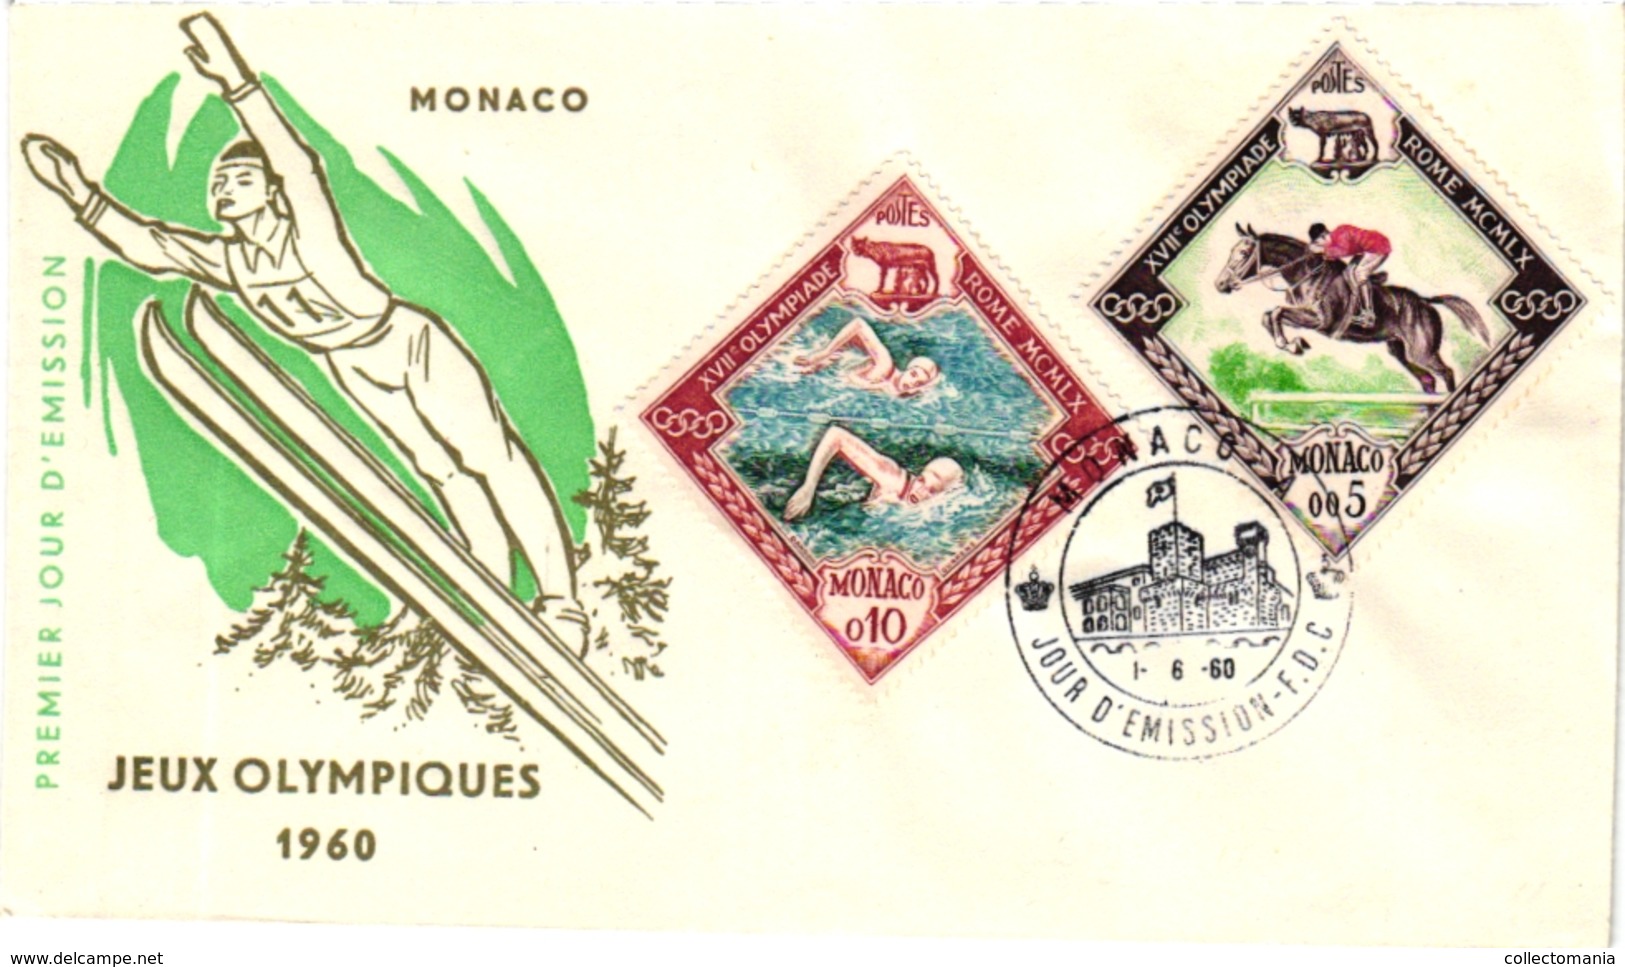 2 First Day Of Issue  Envelope  Jeux Olympiques 1960 MONACO  Premier Jour Emission  Ski - Sports D'hiver